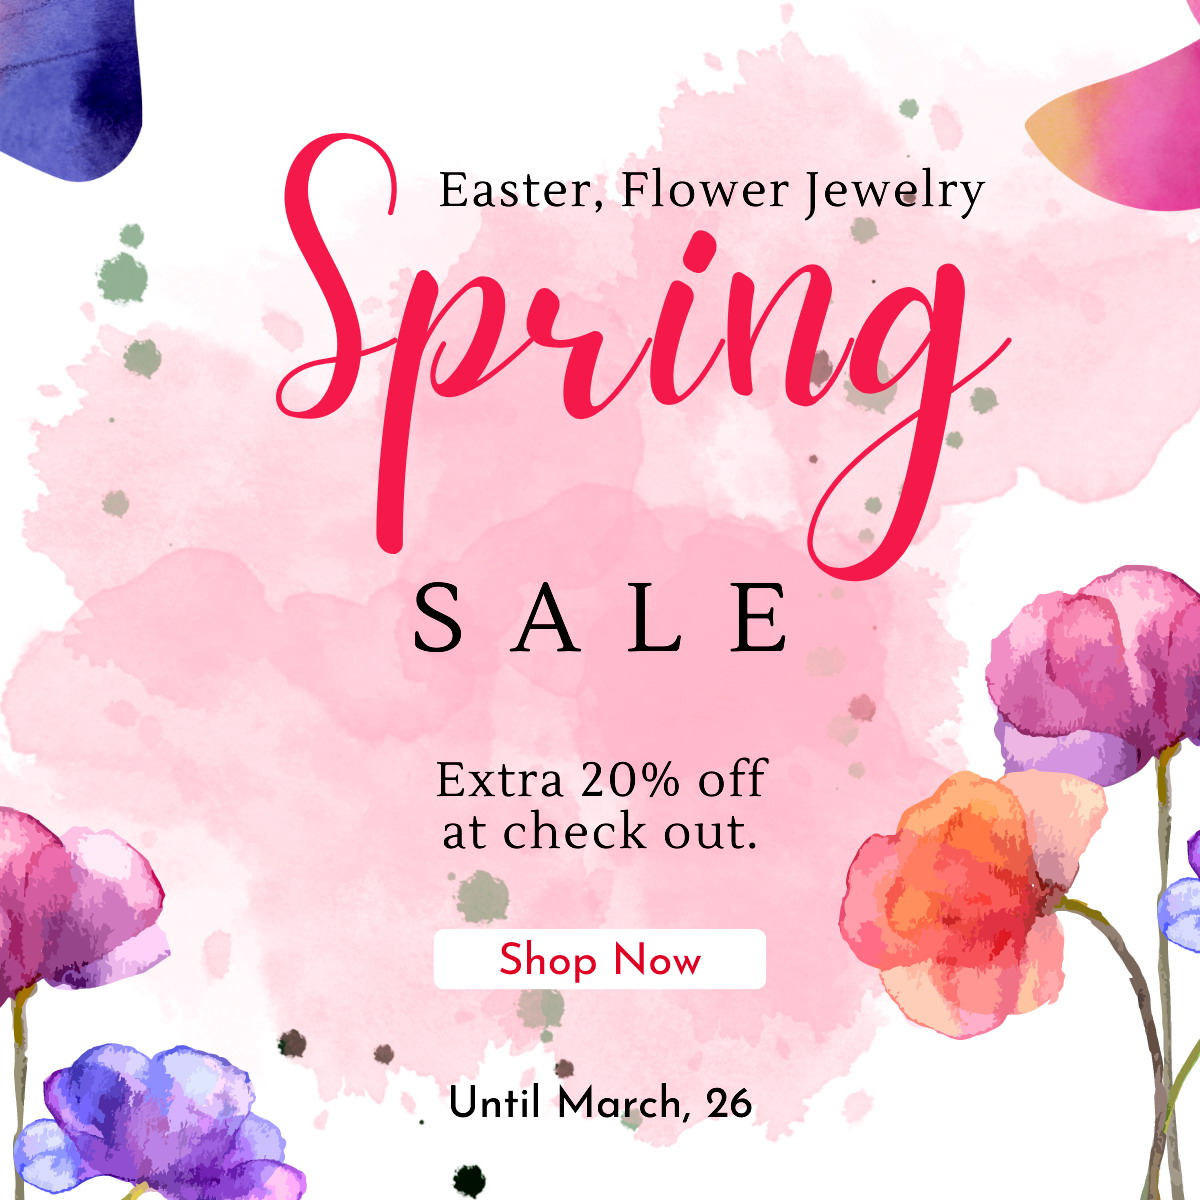 Fionaaccessories.com Spring Easter Flower Jewelry Sale Extra 20% OFF at Check out until Mar. 26, 2023.